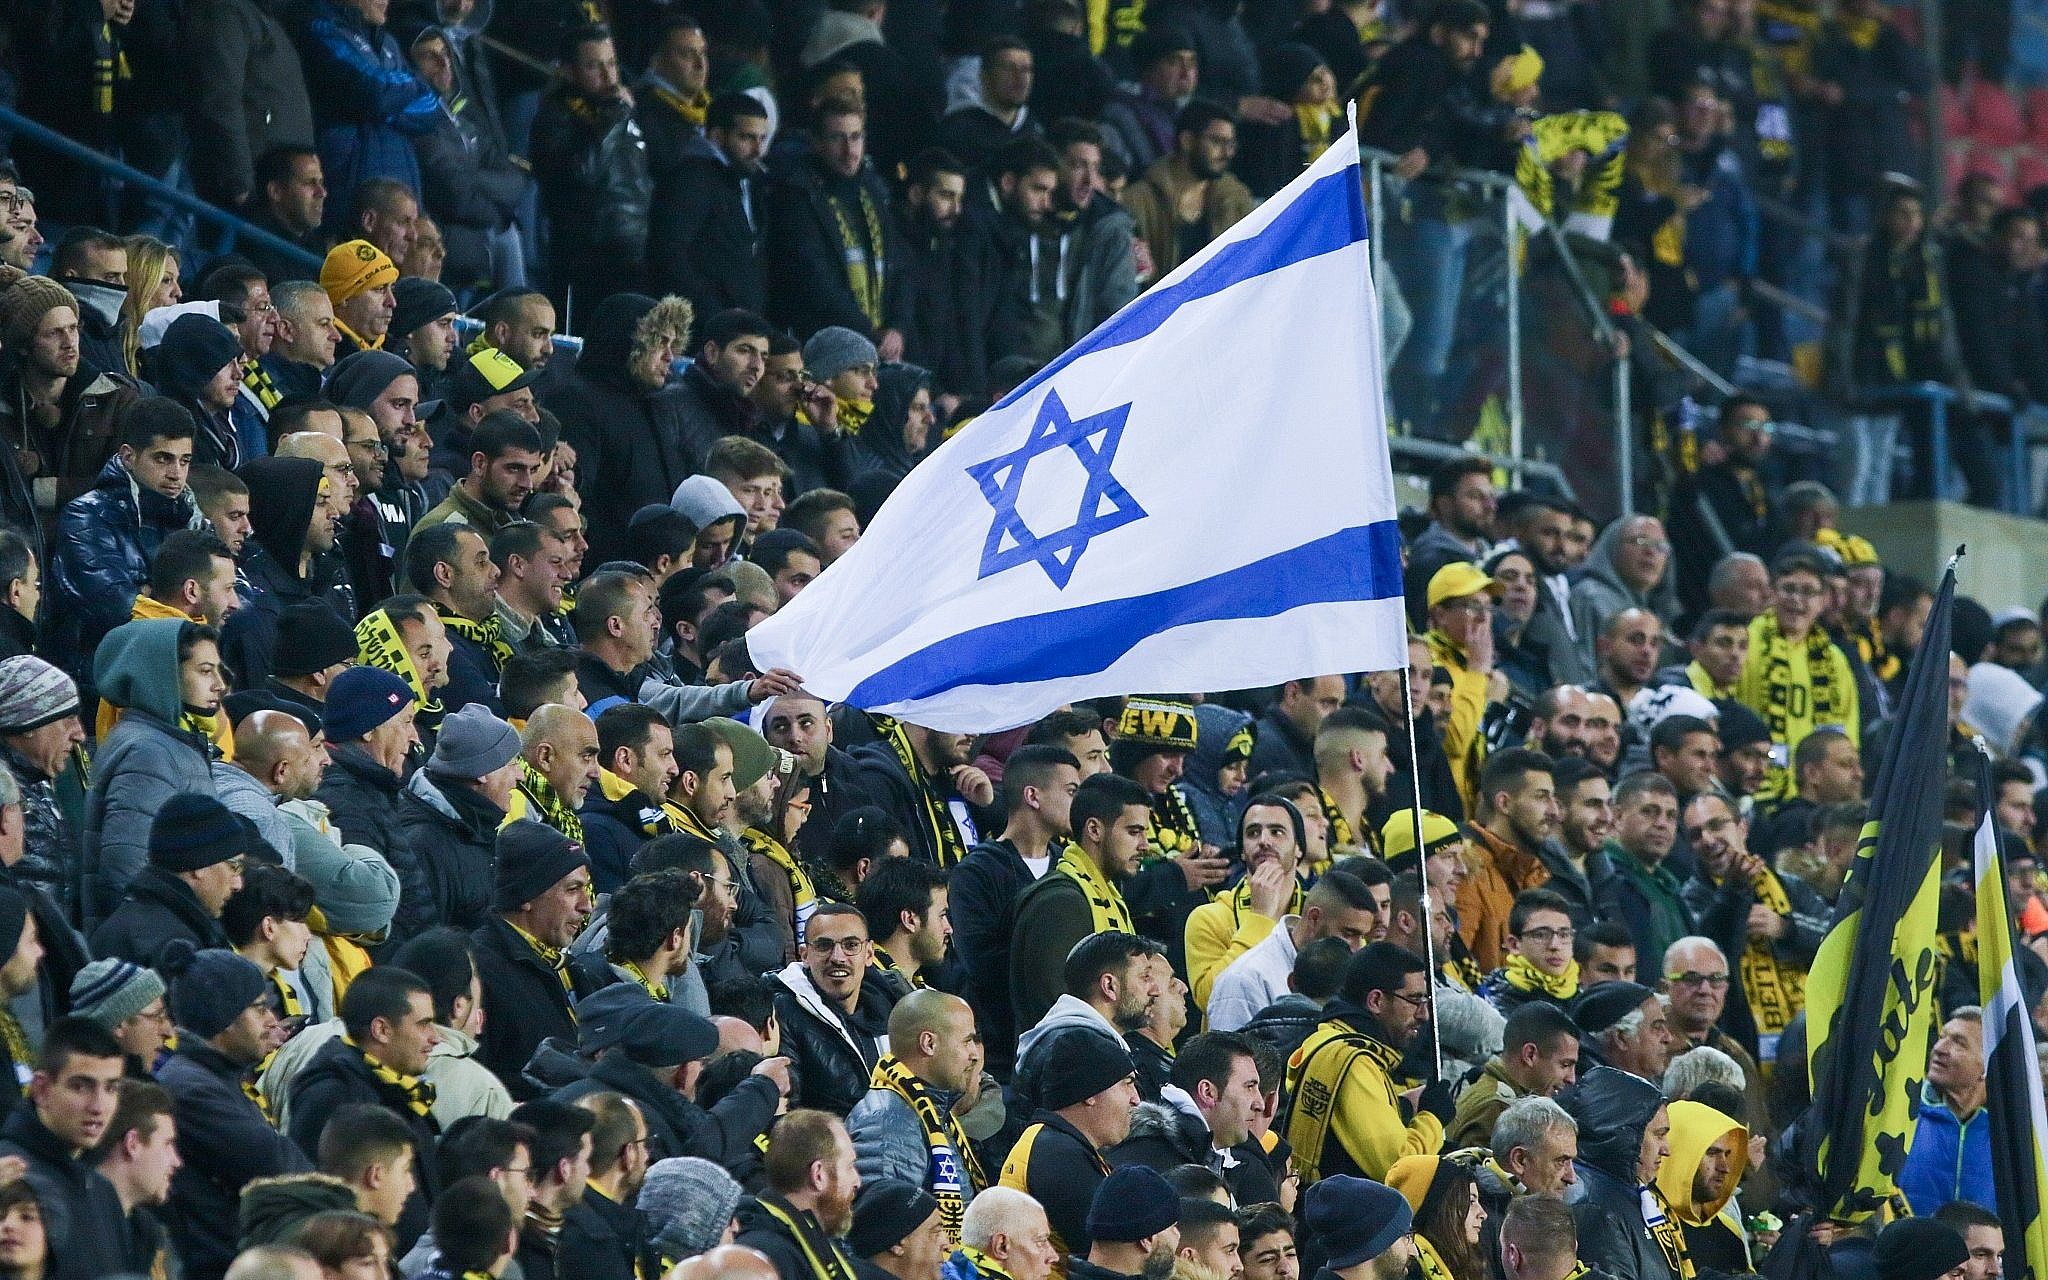 Belgian soccer fans sing chant about burning Jews - The Jerusalem Post